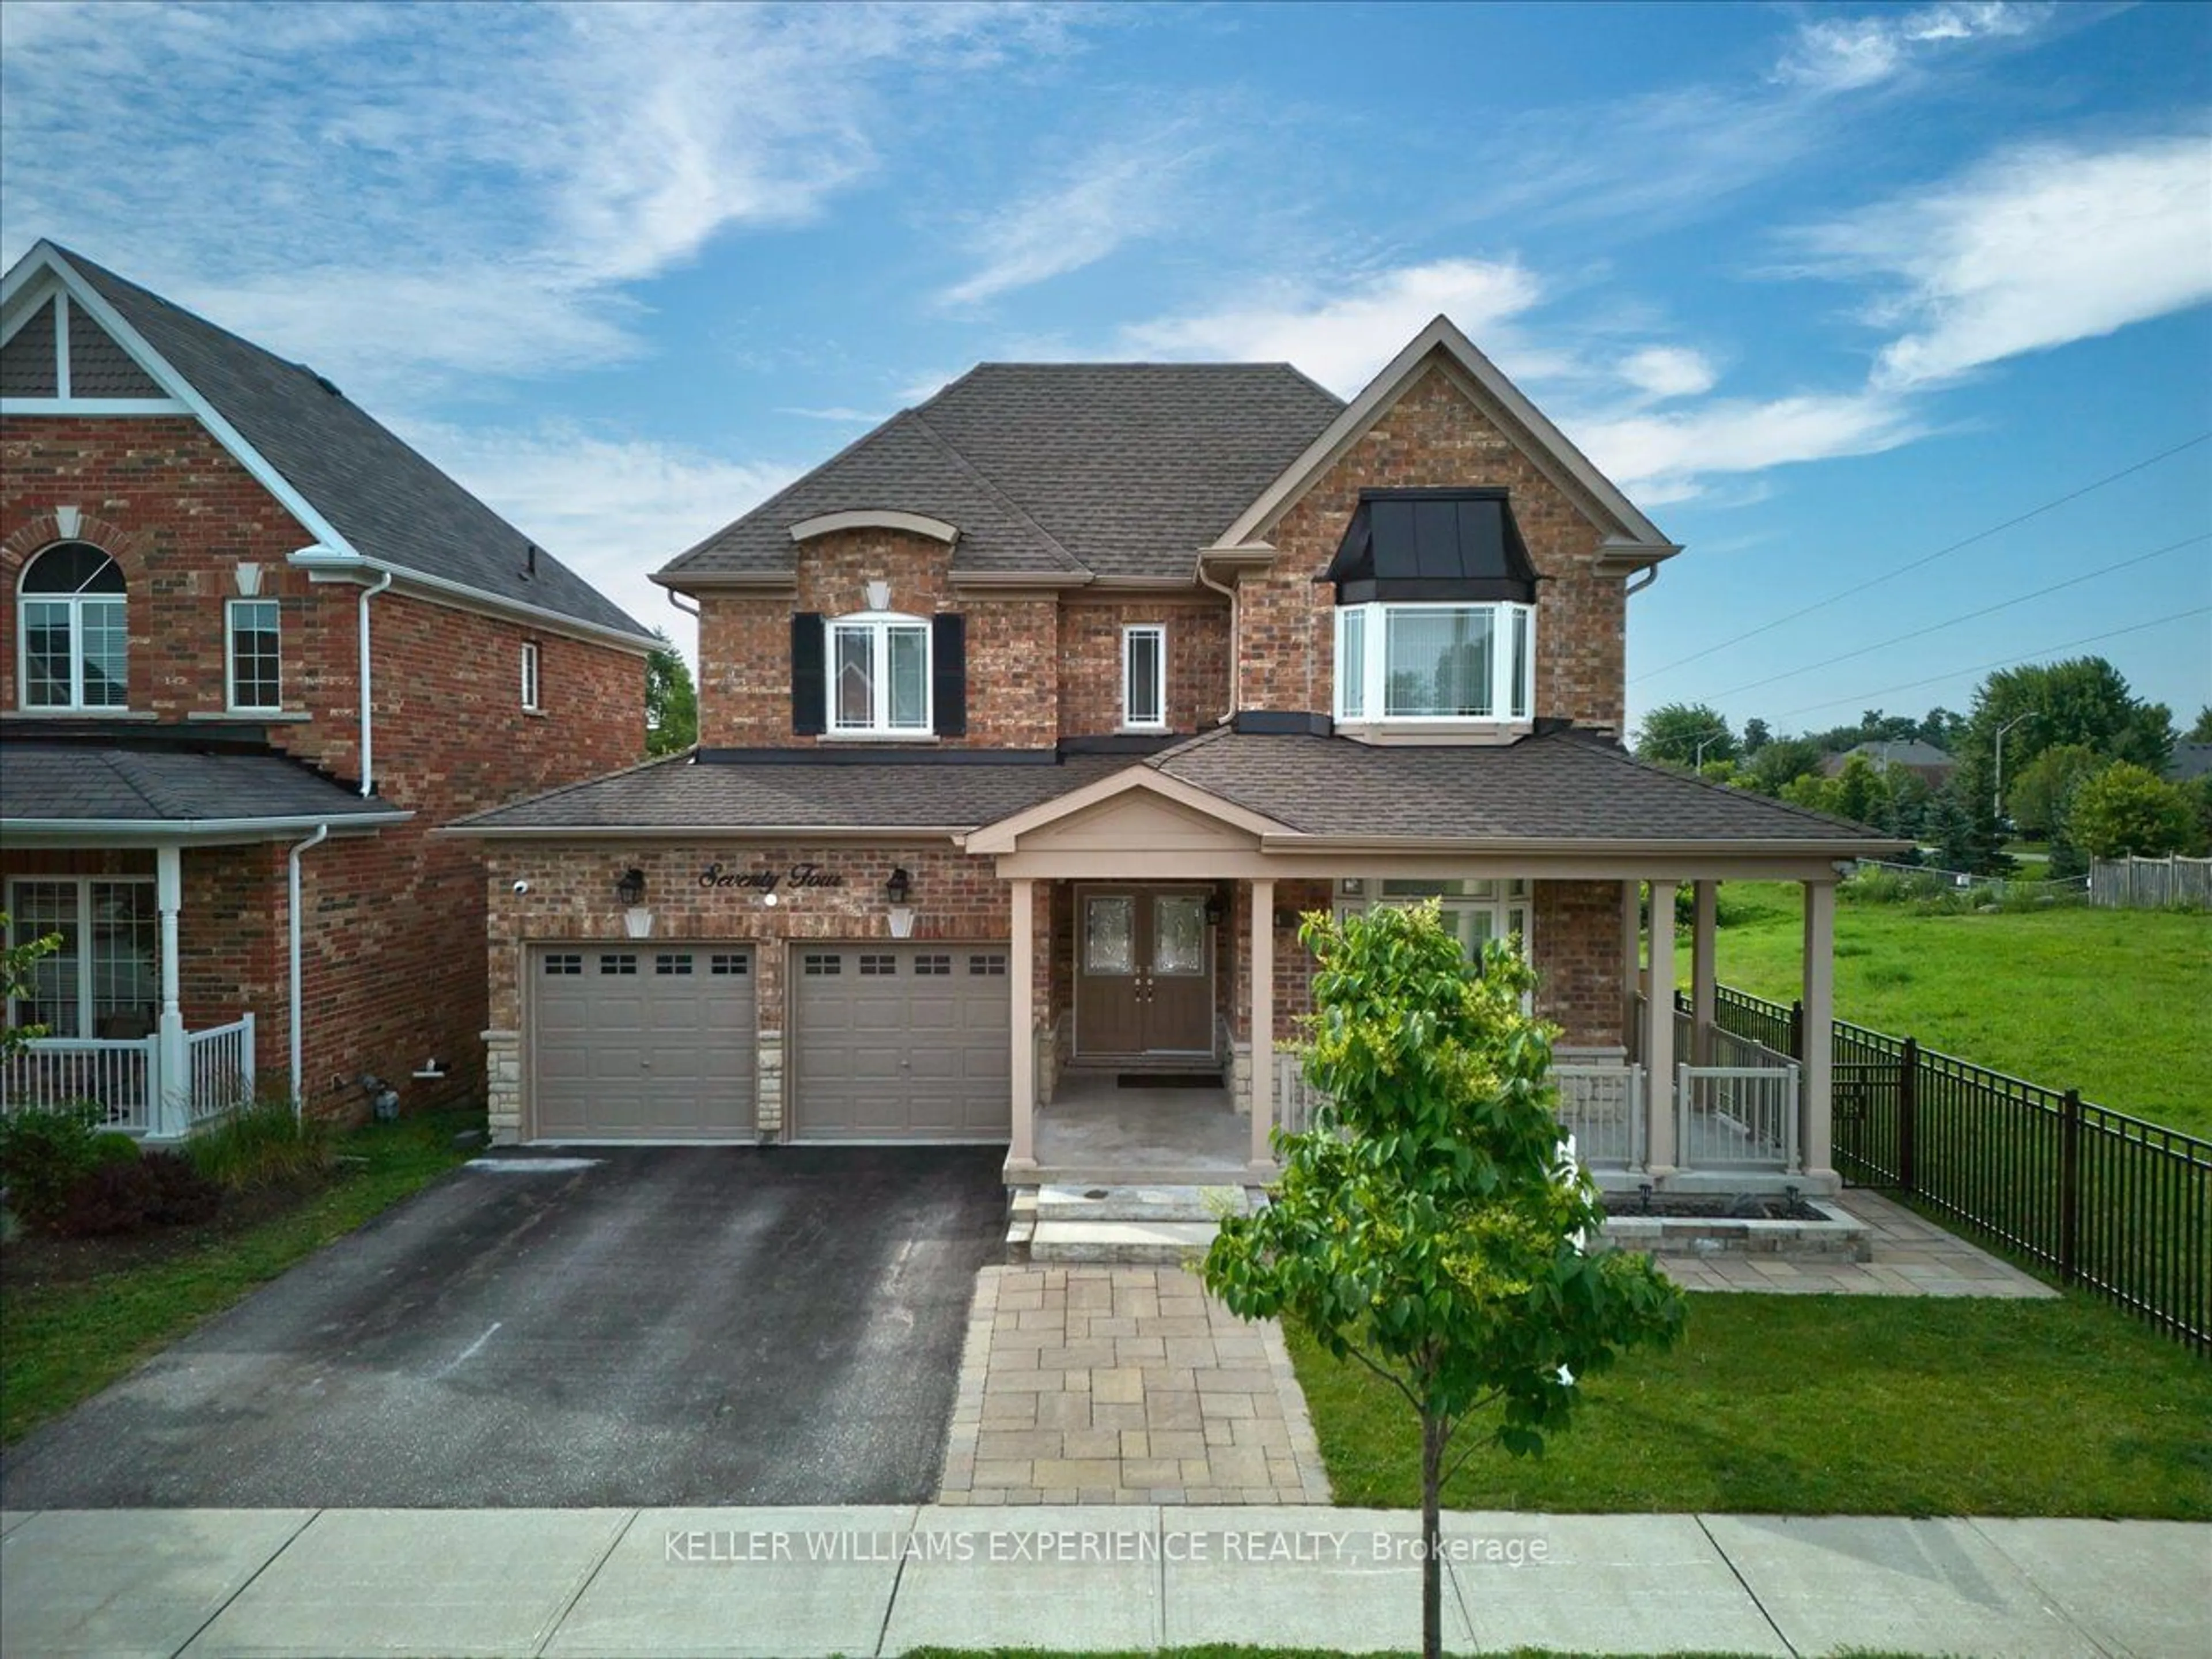 Home with brick exterior material for 74 Megan Cres, Barrie Ontario L4N 6E4